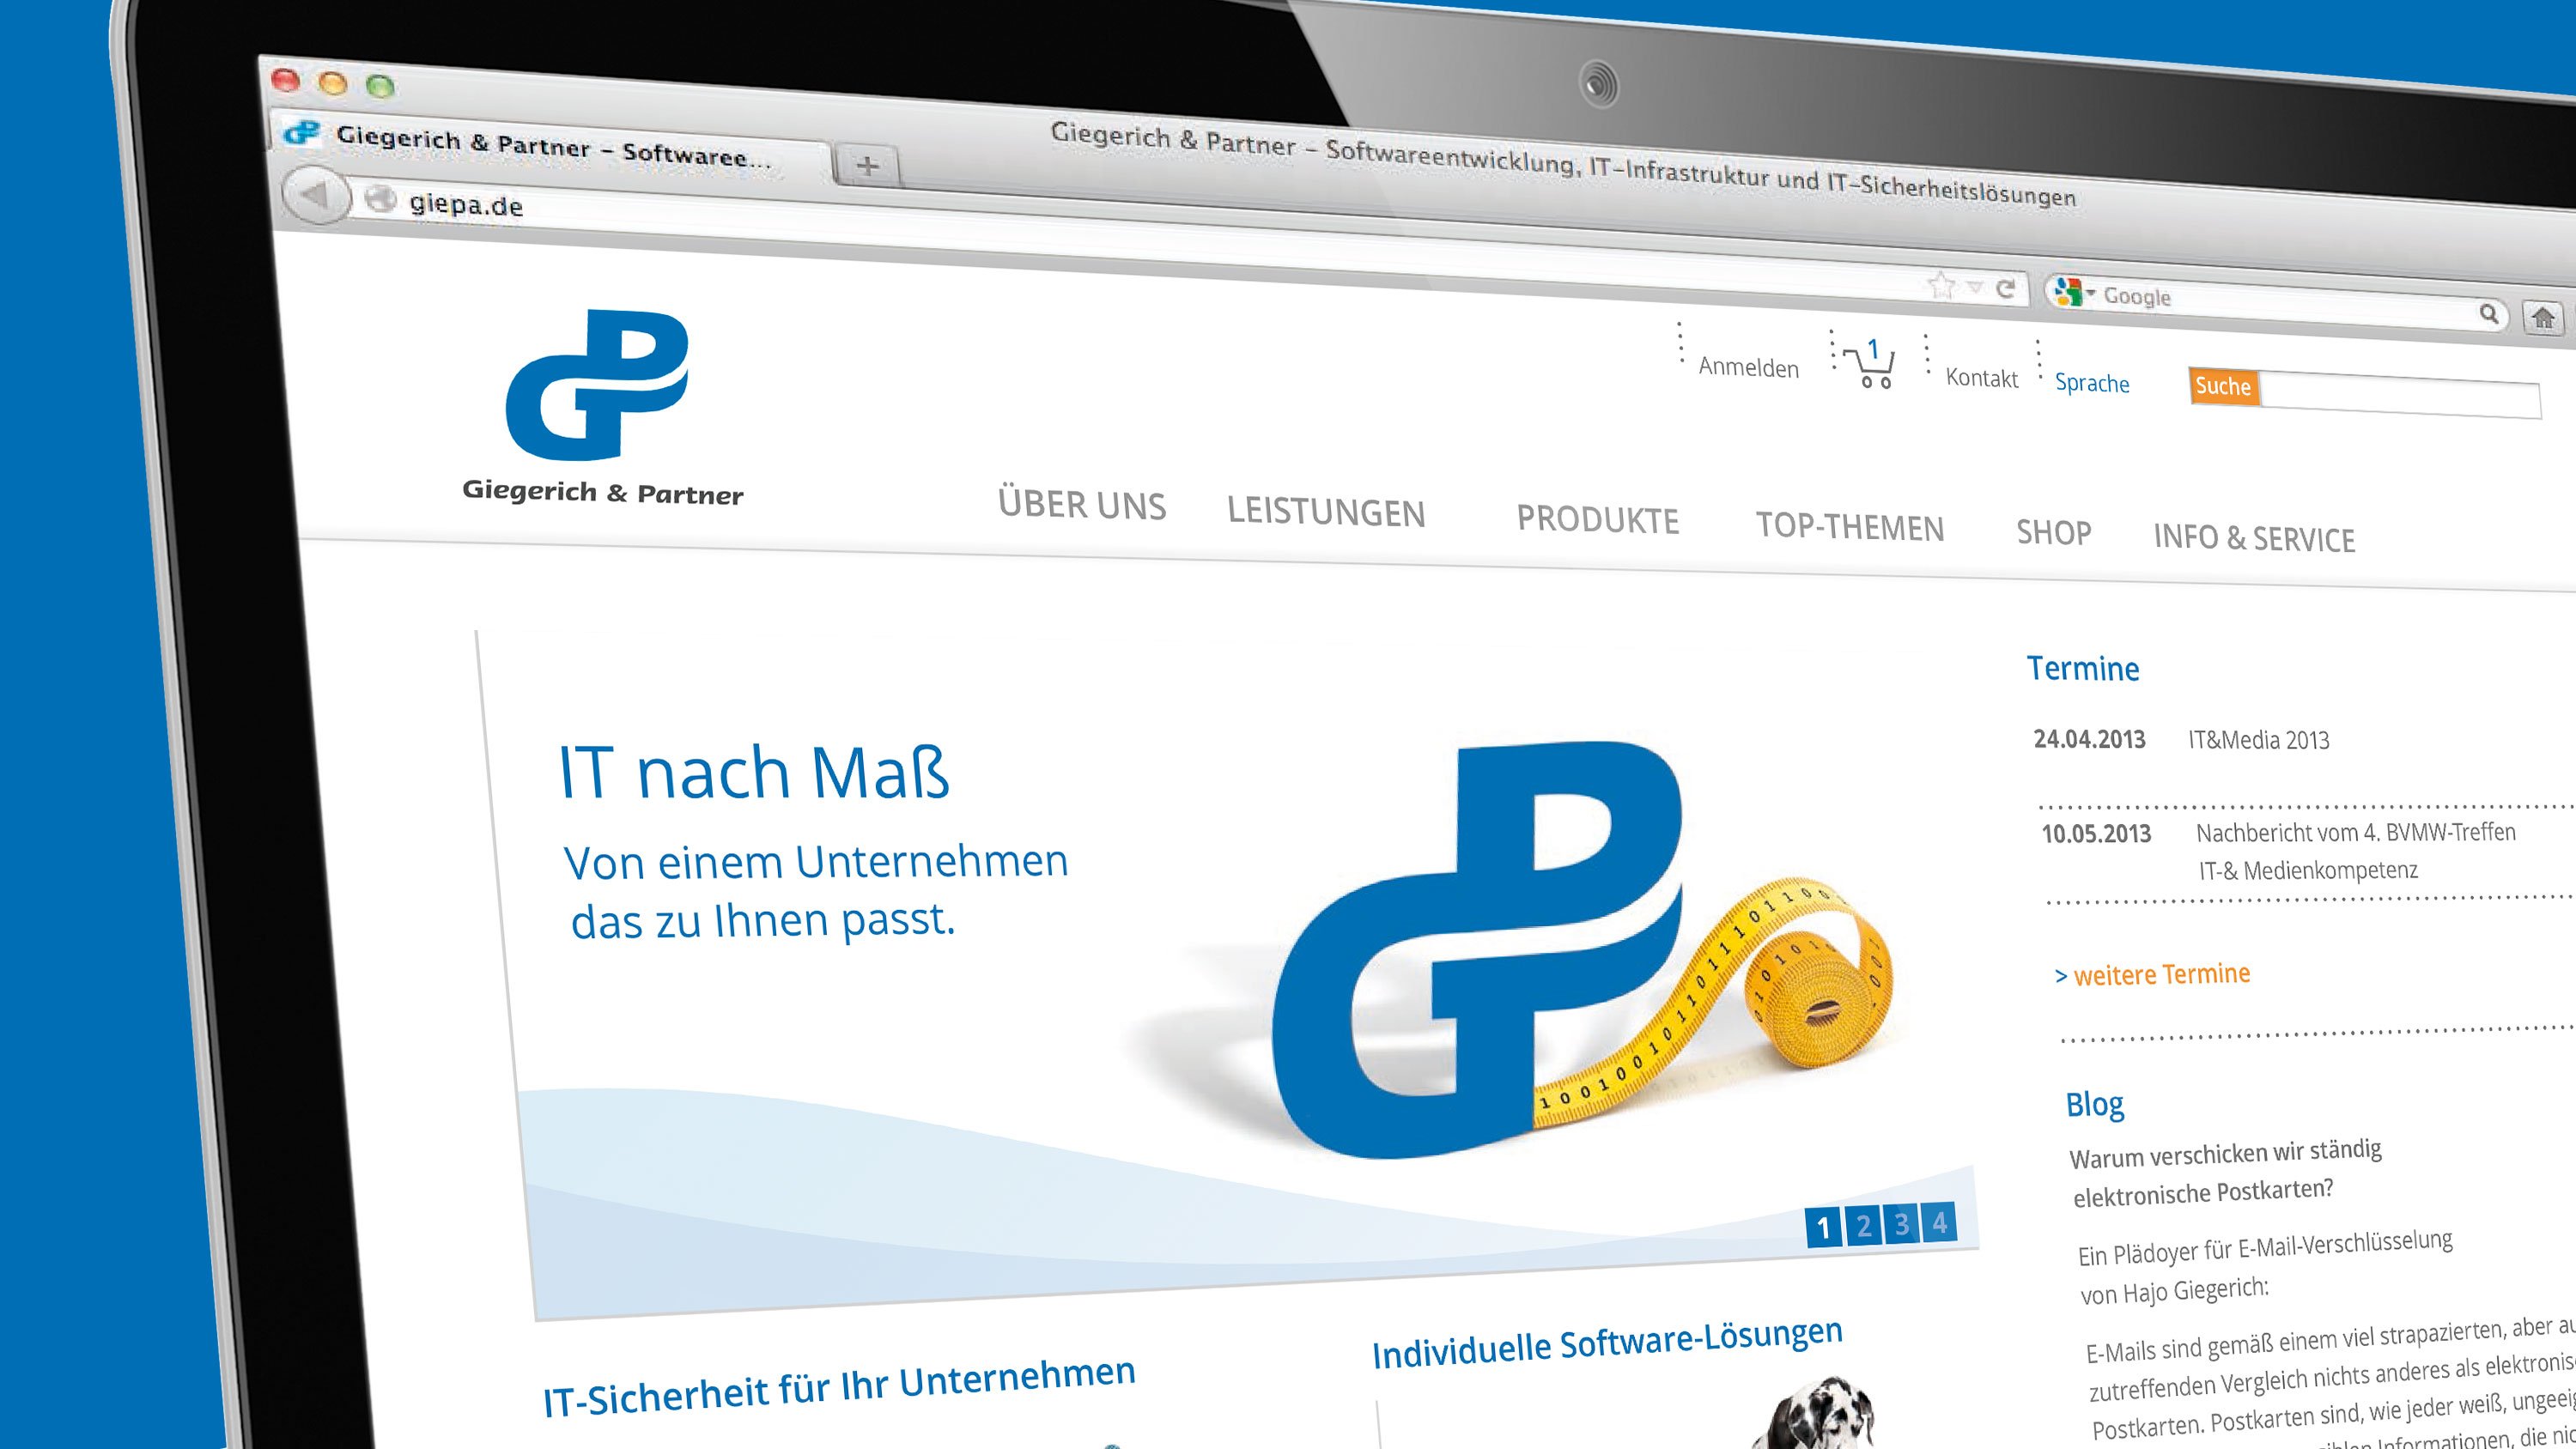 Responsive web design, web shop for Giegerich and partners: DIE NEUDENKER® Agency, Darmstadt